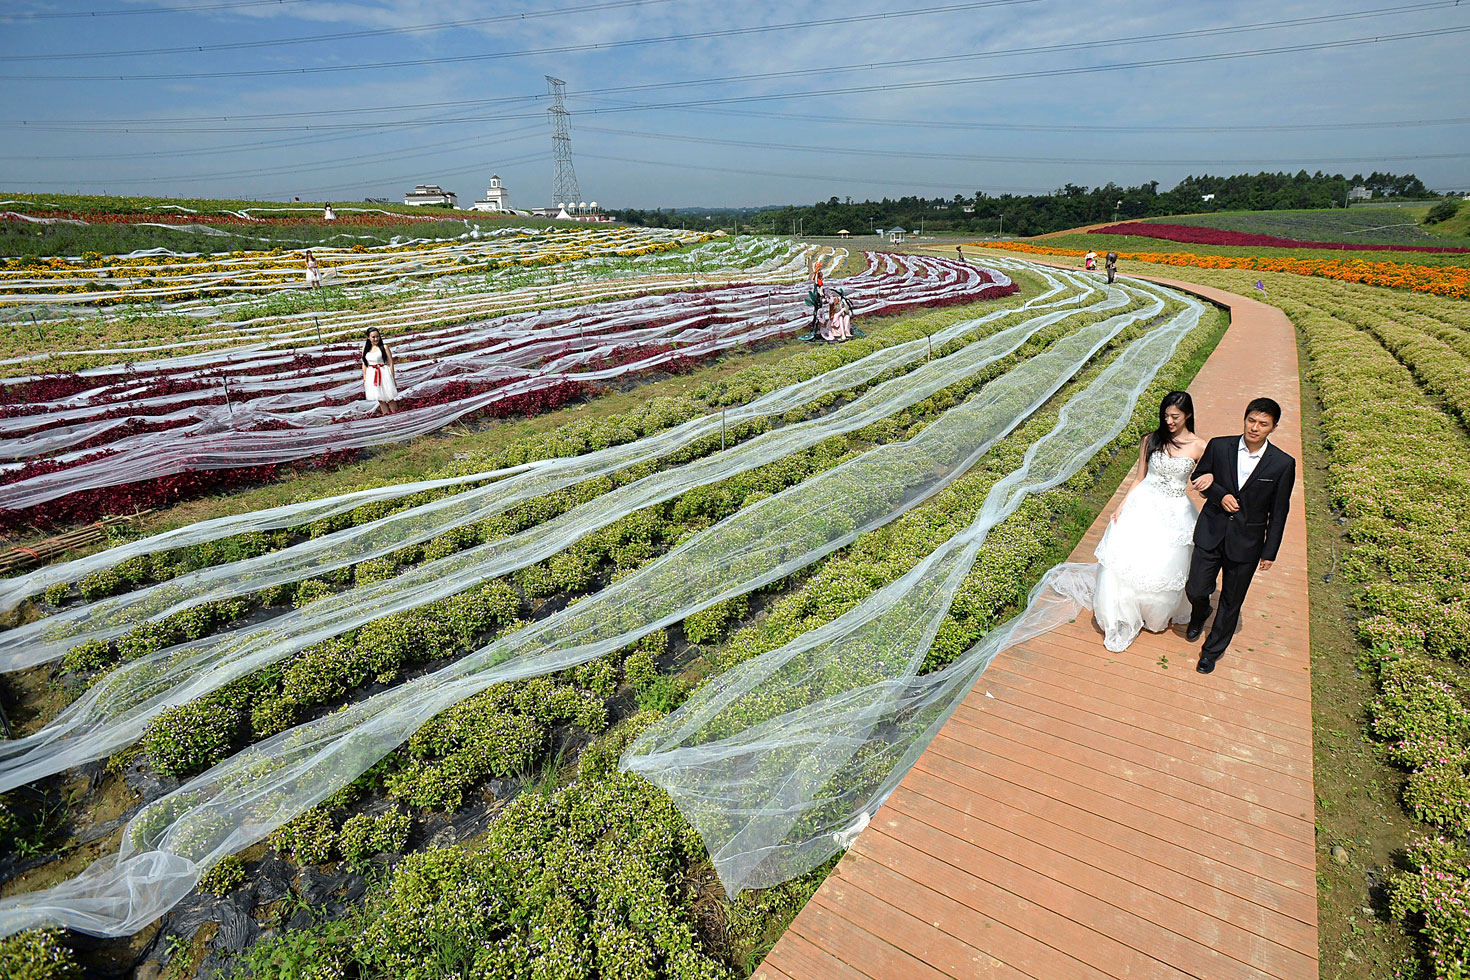 Staff members dressed as newlyweds walk along a path as they display a 4,483 yard wedding dress train trailed along shrubs, during a promotional event on Sept. 24 in Chengdu, China. The train costs 6,520 dollars.